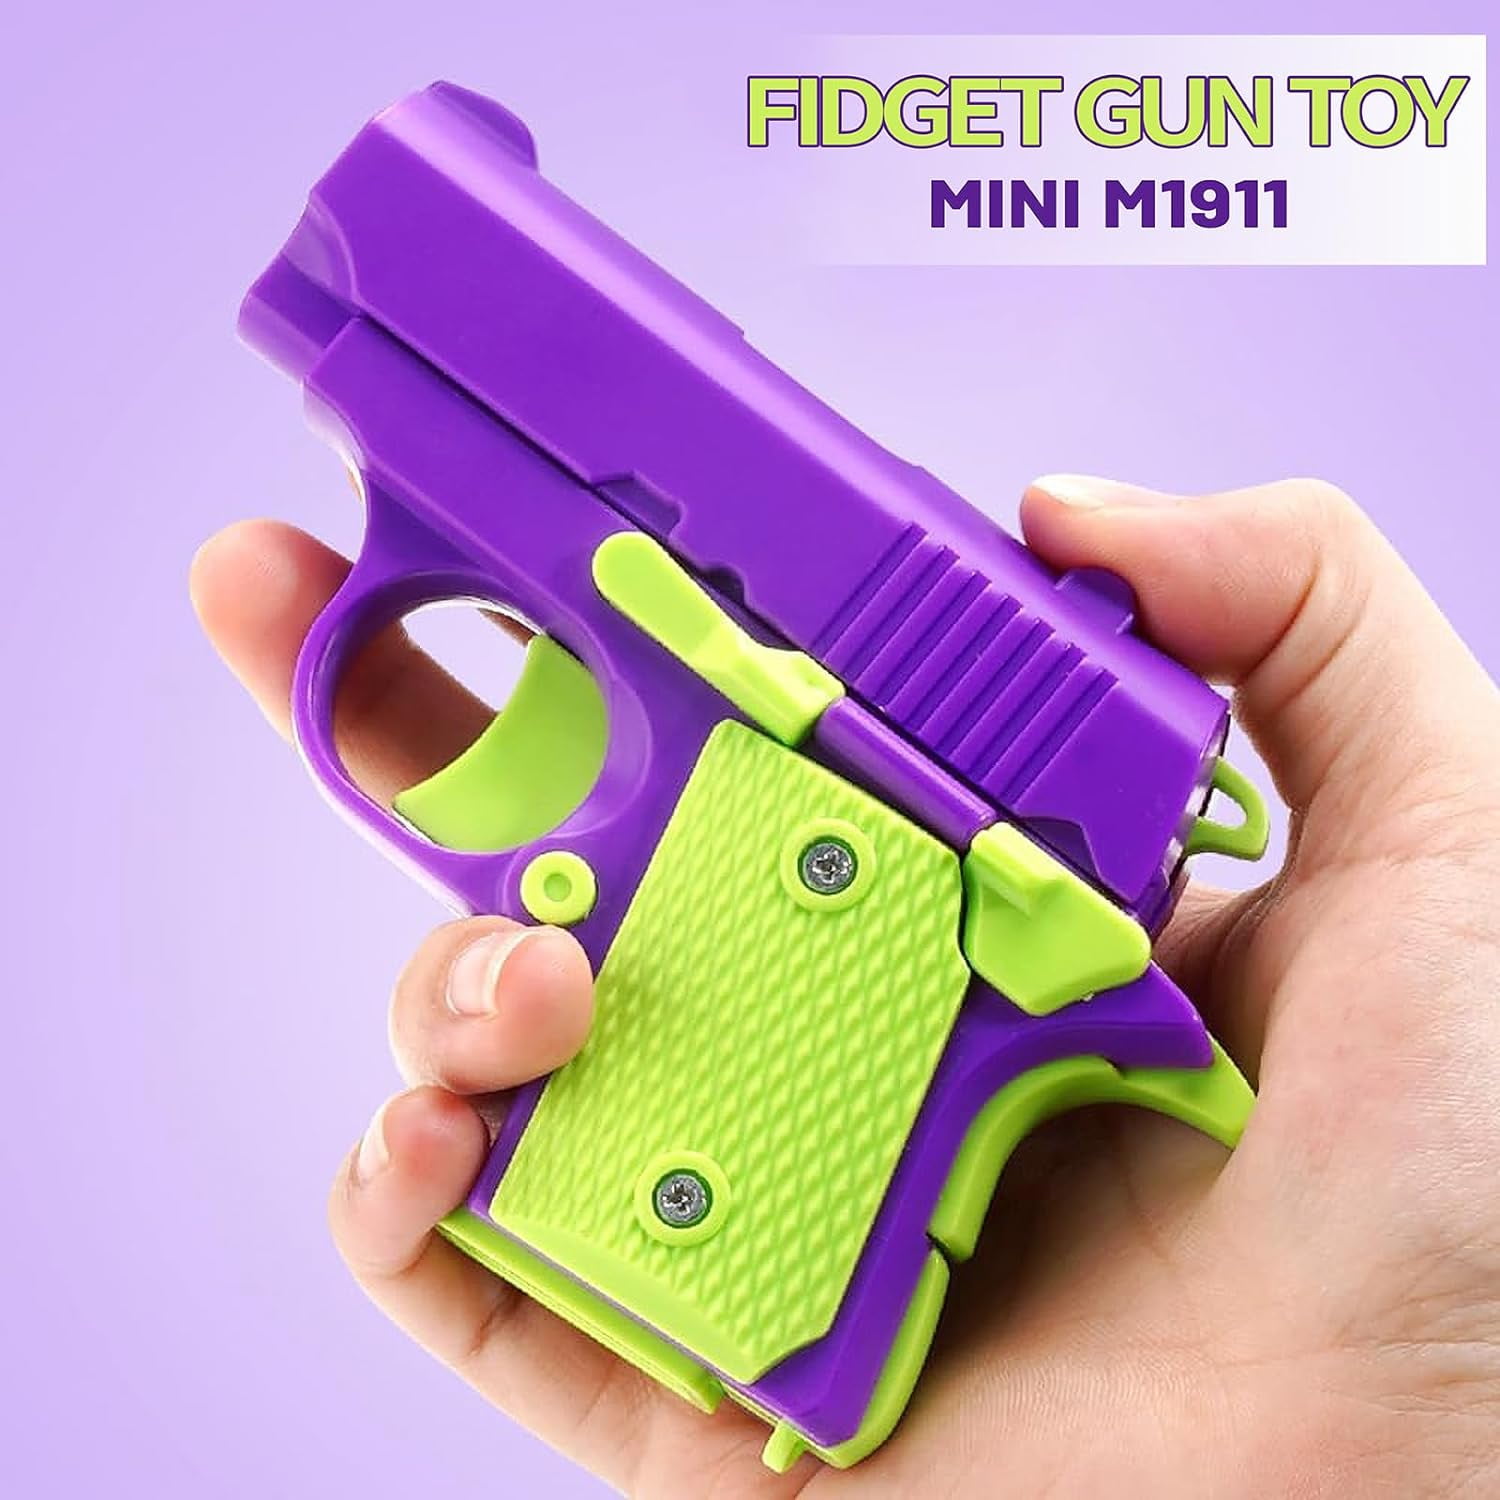  1911 3D Printed Small Pistol Toys, Stress Relief Pistol Toys  for Adults, Suitable for Relieving ADHD, Anxiety, Suitable Toys for Adults  and Kids Best Gift for Friends(Blue*WVhite) : Toys & Games